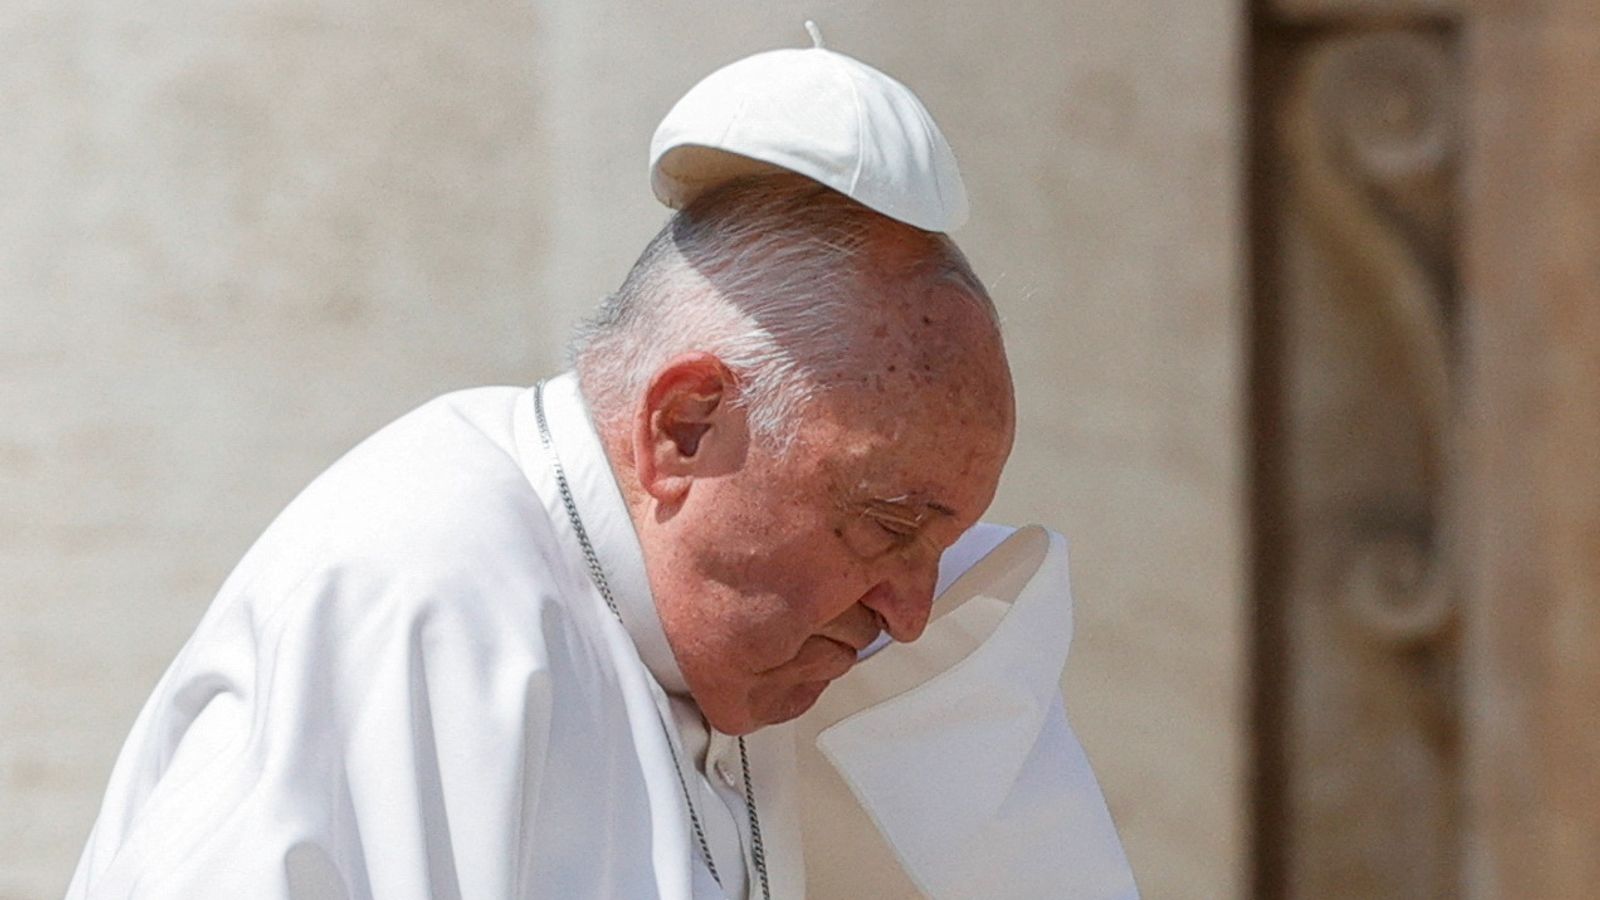 Pope Francis used derogatory term for LGBT community, reports claim